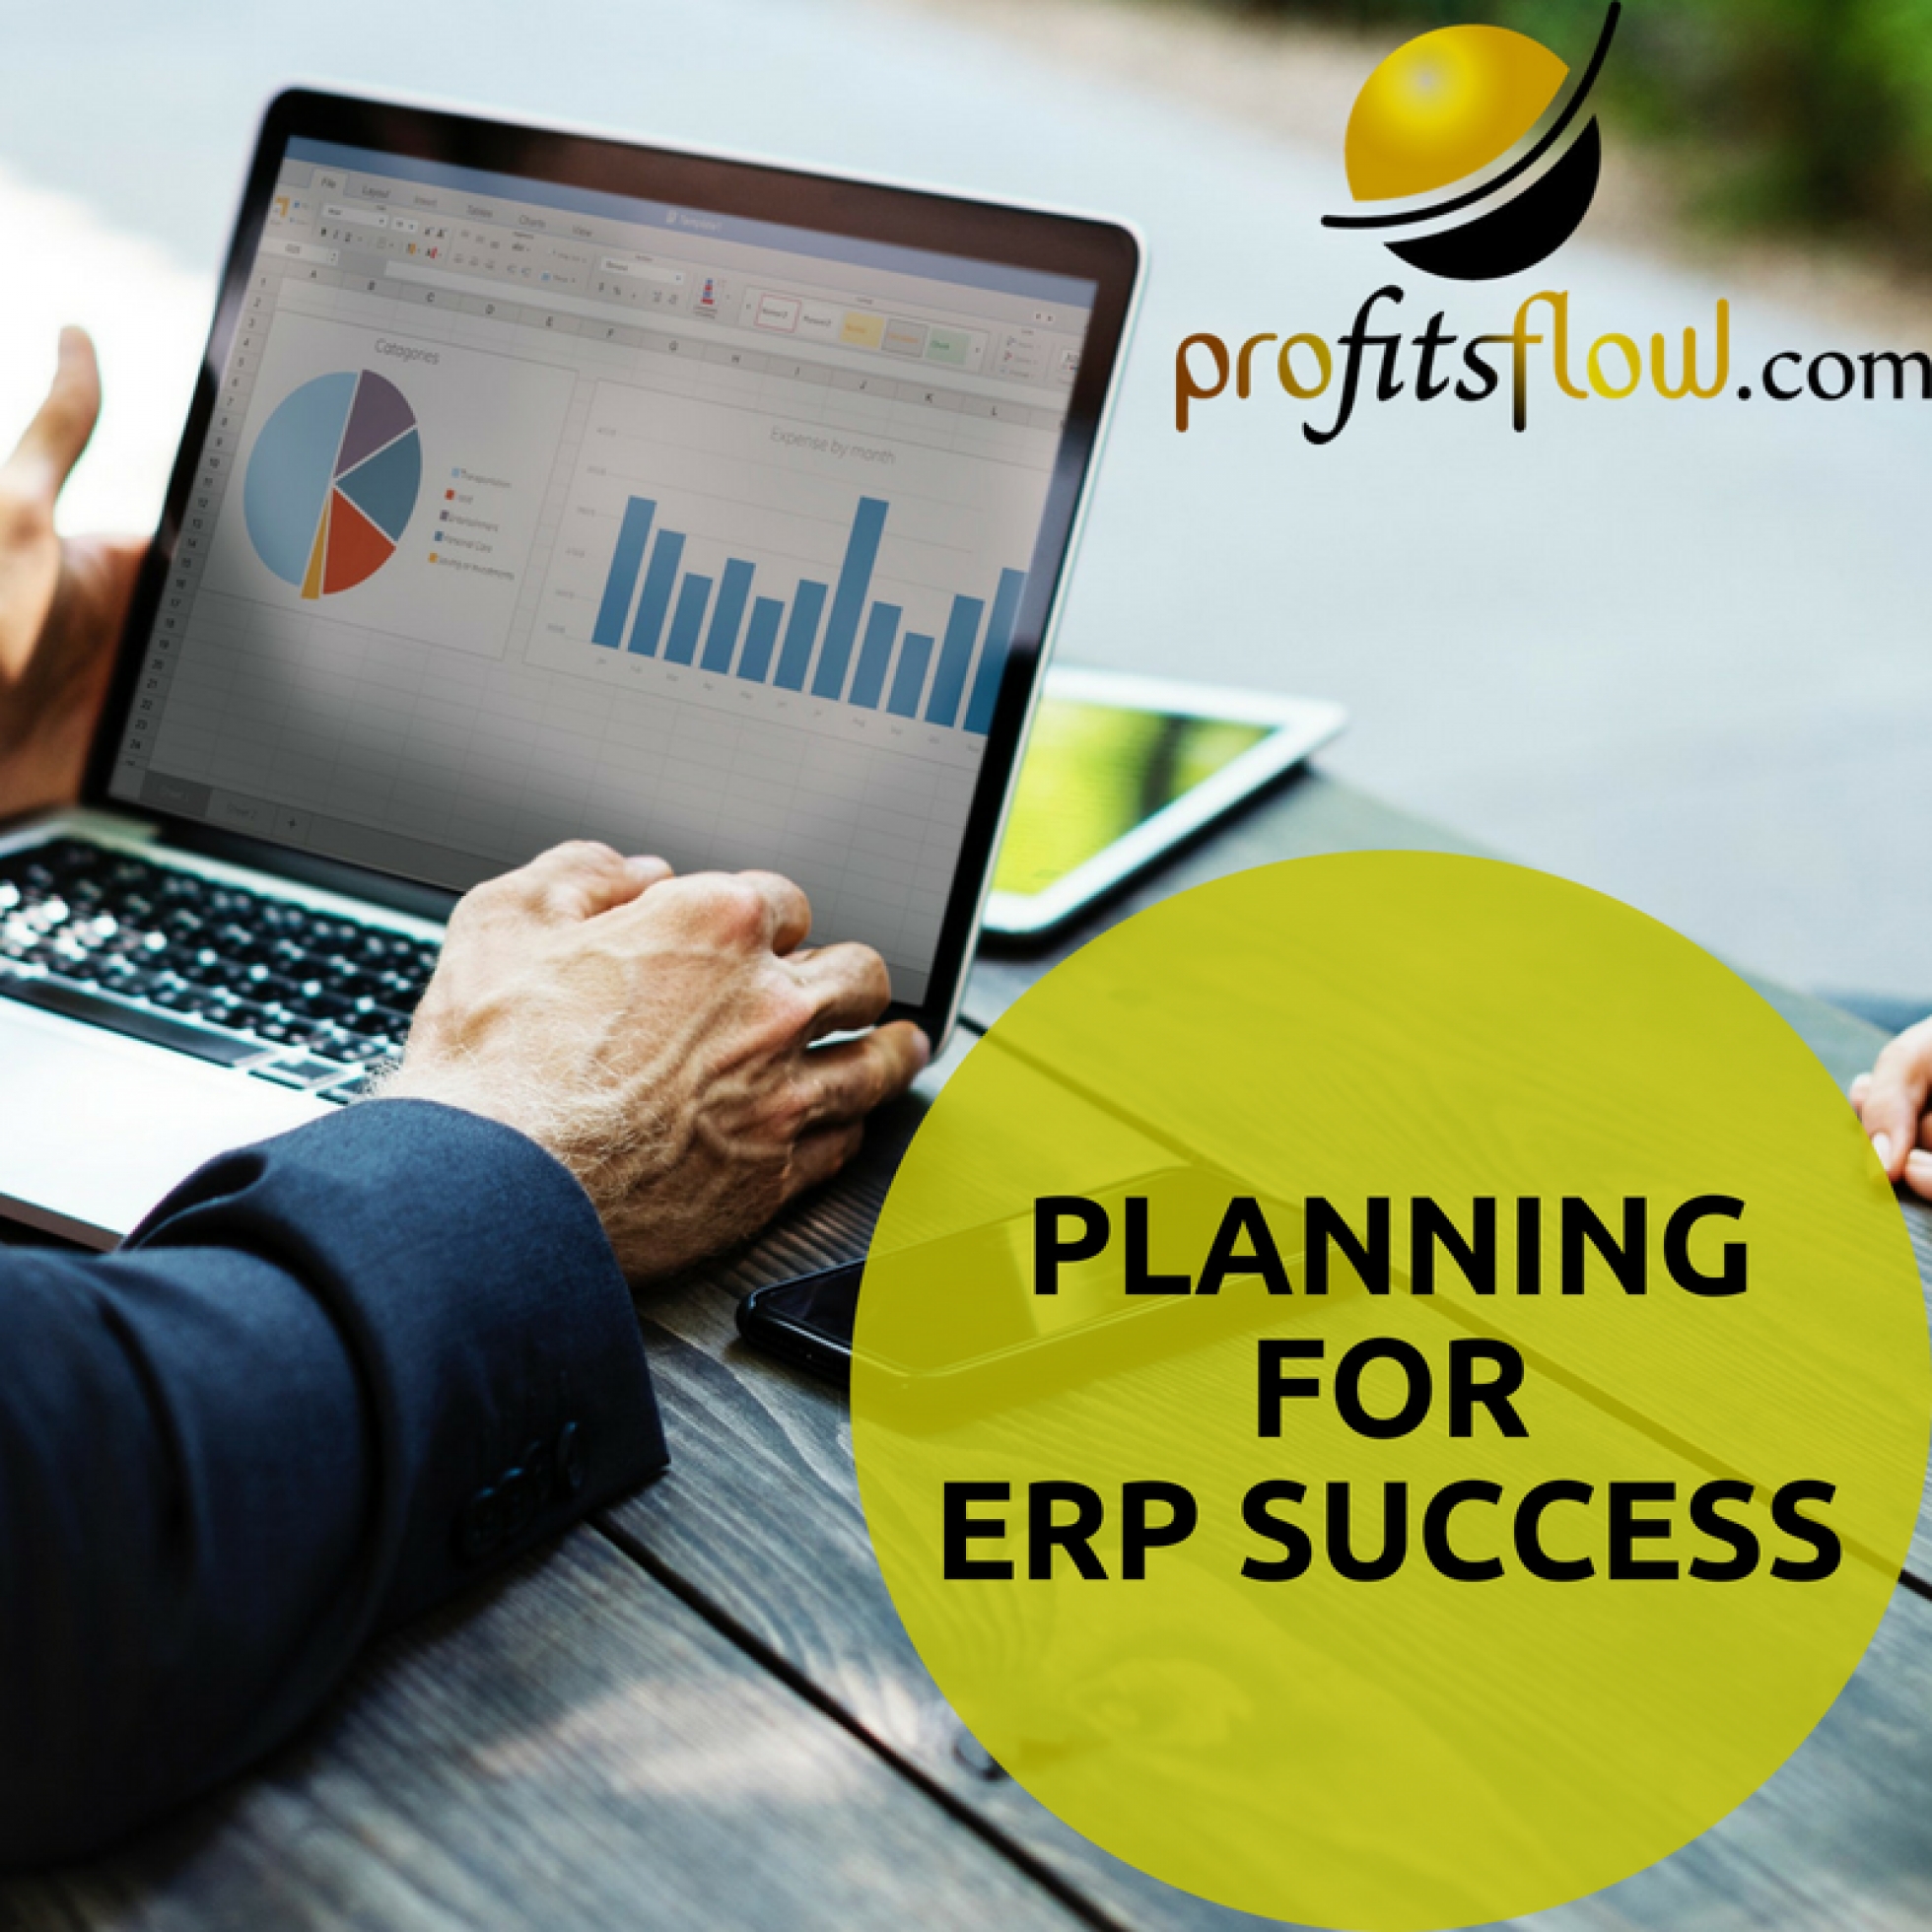 How to Plan for Your ERP Success